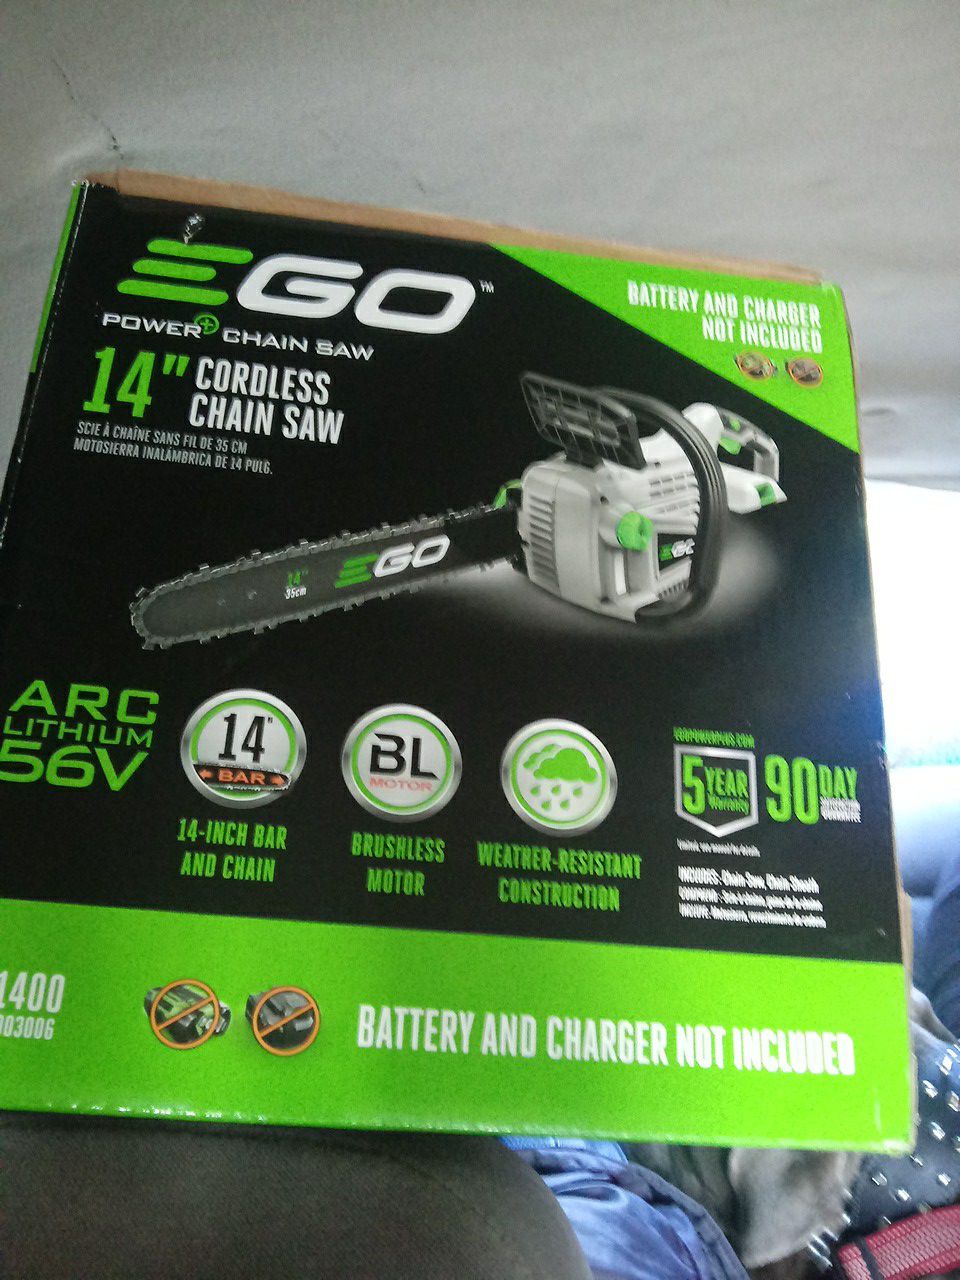 Brand new still in the box Ego chainsaw 270 new..i can get you two batterys and a charger for it for an extra 80